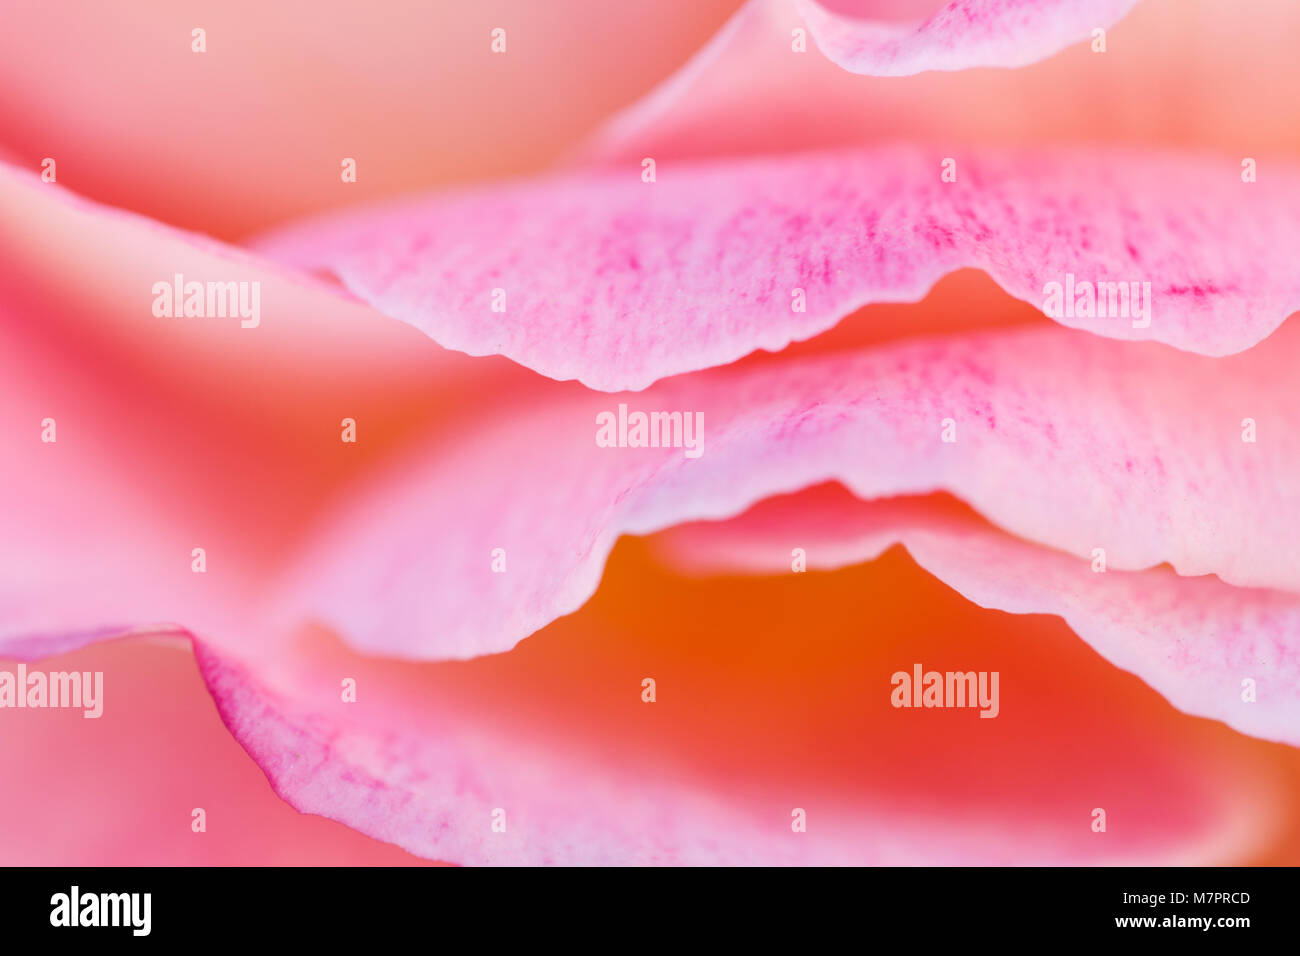 Close up image of a pink rose Stock Photo